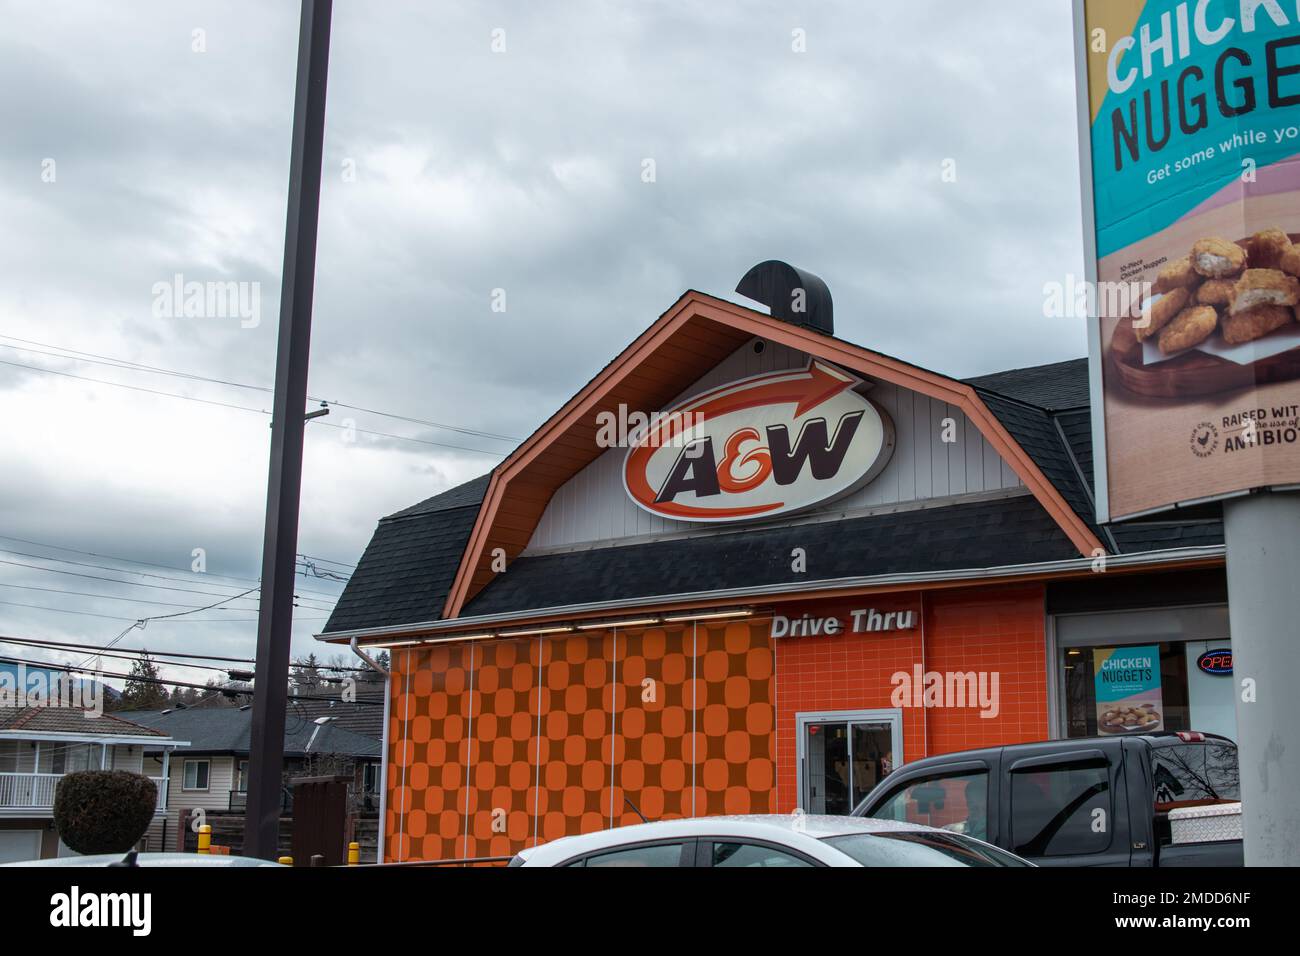 Sign of A&W. A&W, originally part of the U.S.-based A&W Restaurants, is a fast food restaurant chain in Canada by A&W Food Services of Canada, Inc. Stock Photo